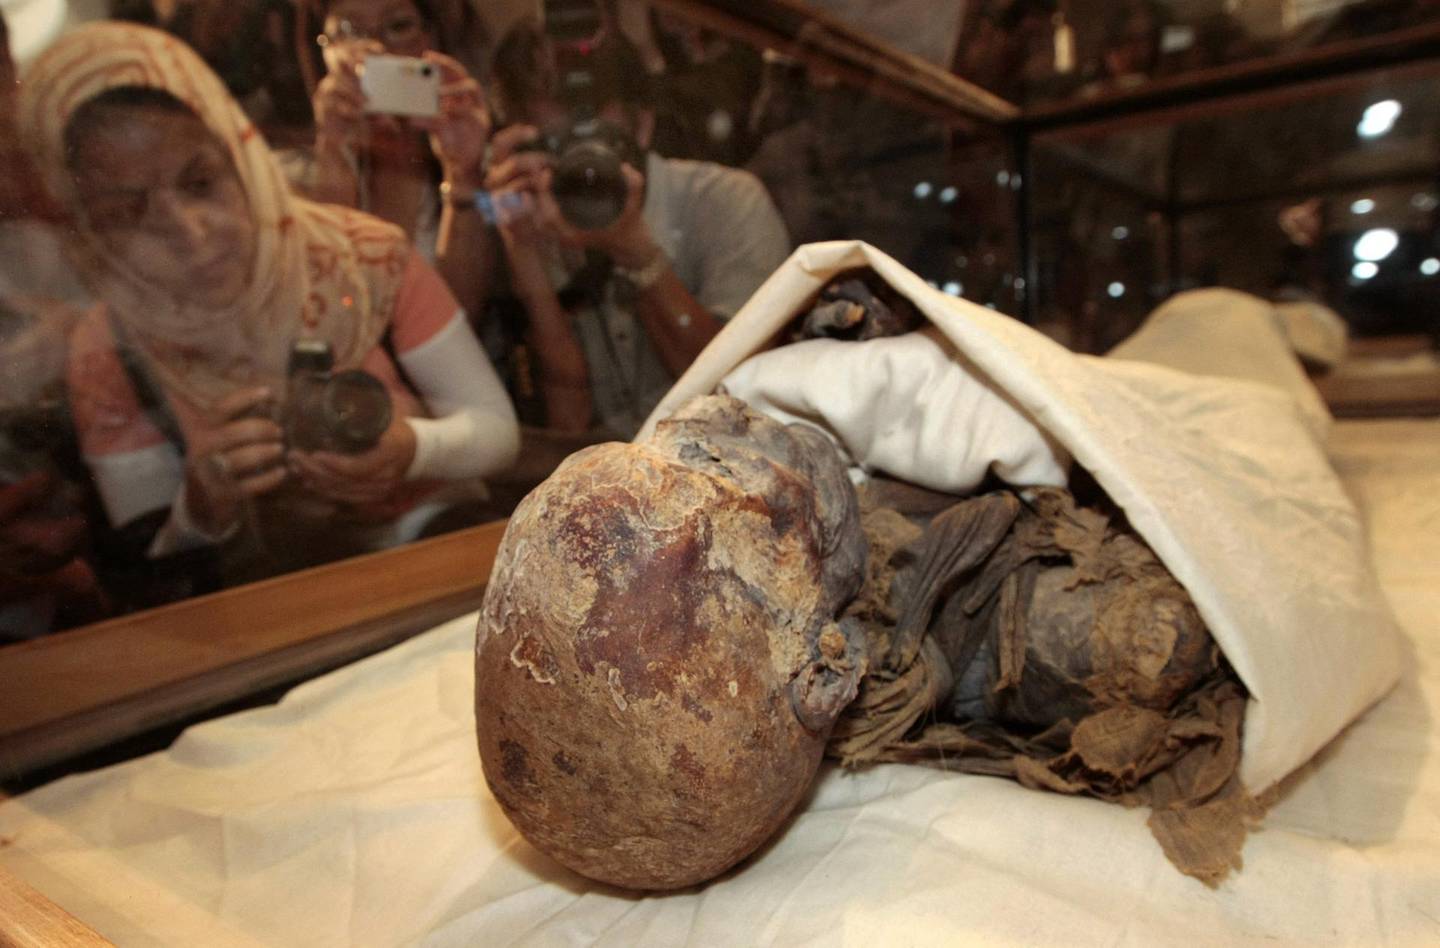 (FILES) In this file photo taken on June 27, 2007, people take pictures of the mummified remains of Queen Hatshepsut, ancient Egypt's most famous female pharaoh, displayed in a glass case after being unveiled at the Cairo Museum. The mummies of 18 ancient Egyptian kings and four queens will be paraded through the streets of Cairo on April 3 evening, in a carnival procession dubbed the Pharaohs' Golden Parade, as they are moved from a long residency at the Egyptian Museum to be put on display at southern Cairo's National Museum of Egyptian Civilisation. / AFP / Cris BOURONCLE
